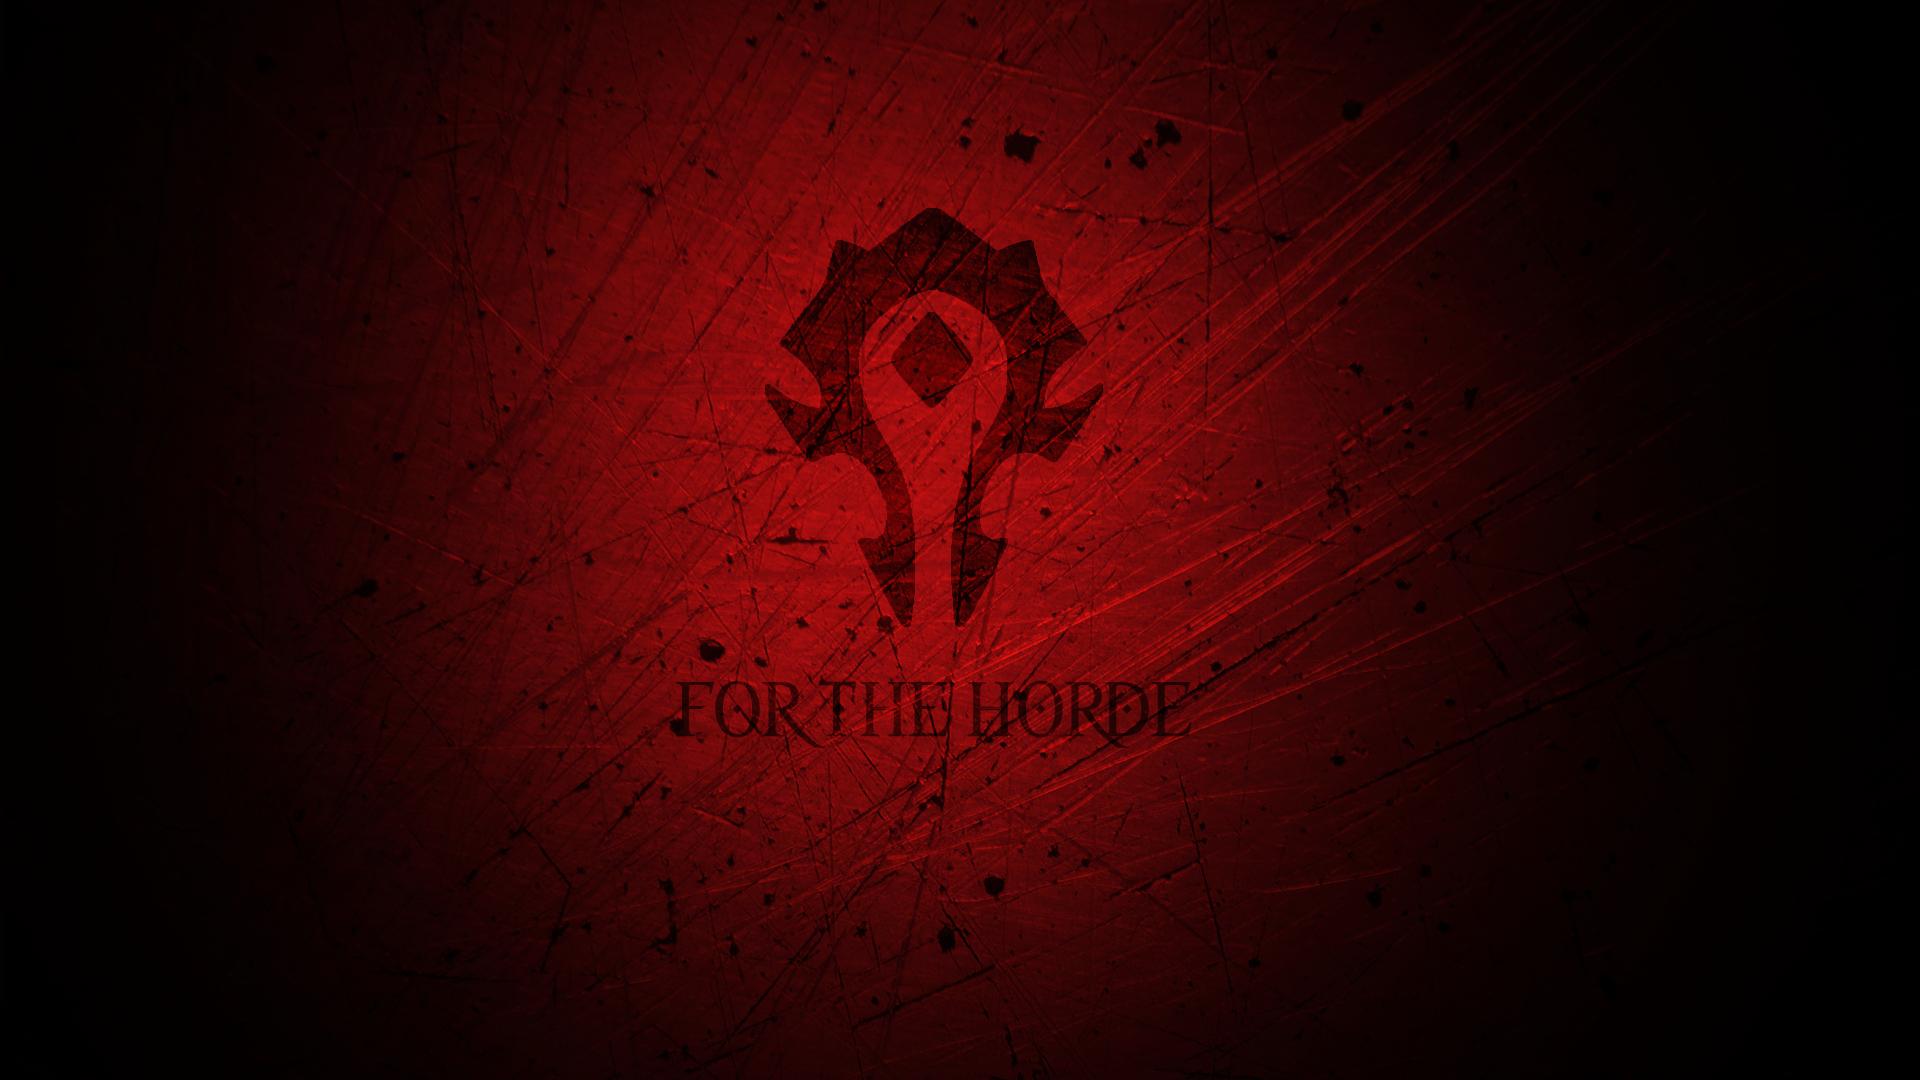 Free Download Wow Wallpaper Horde Images Pictures Becuo 19x1080 For Your Desktop Mobile Tablet Explore 48 Wow Wallpaper Horde Horde Symbol Wallpaper Horde Logo Wallpaper Wow Hd Wallpapers